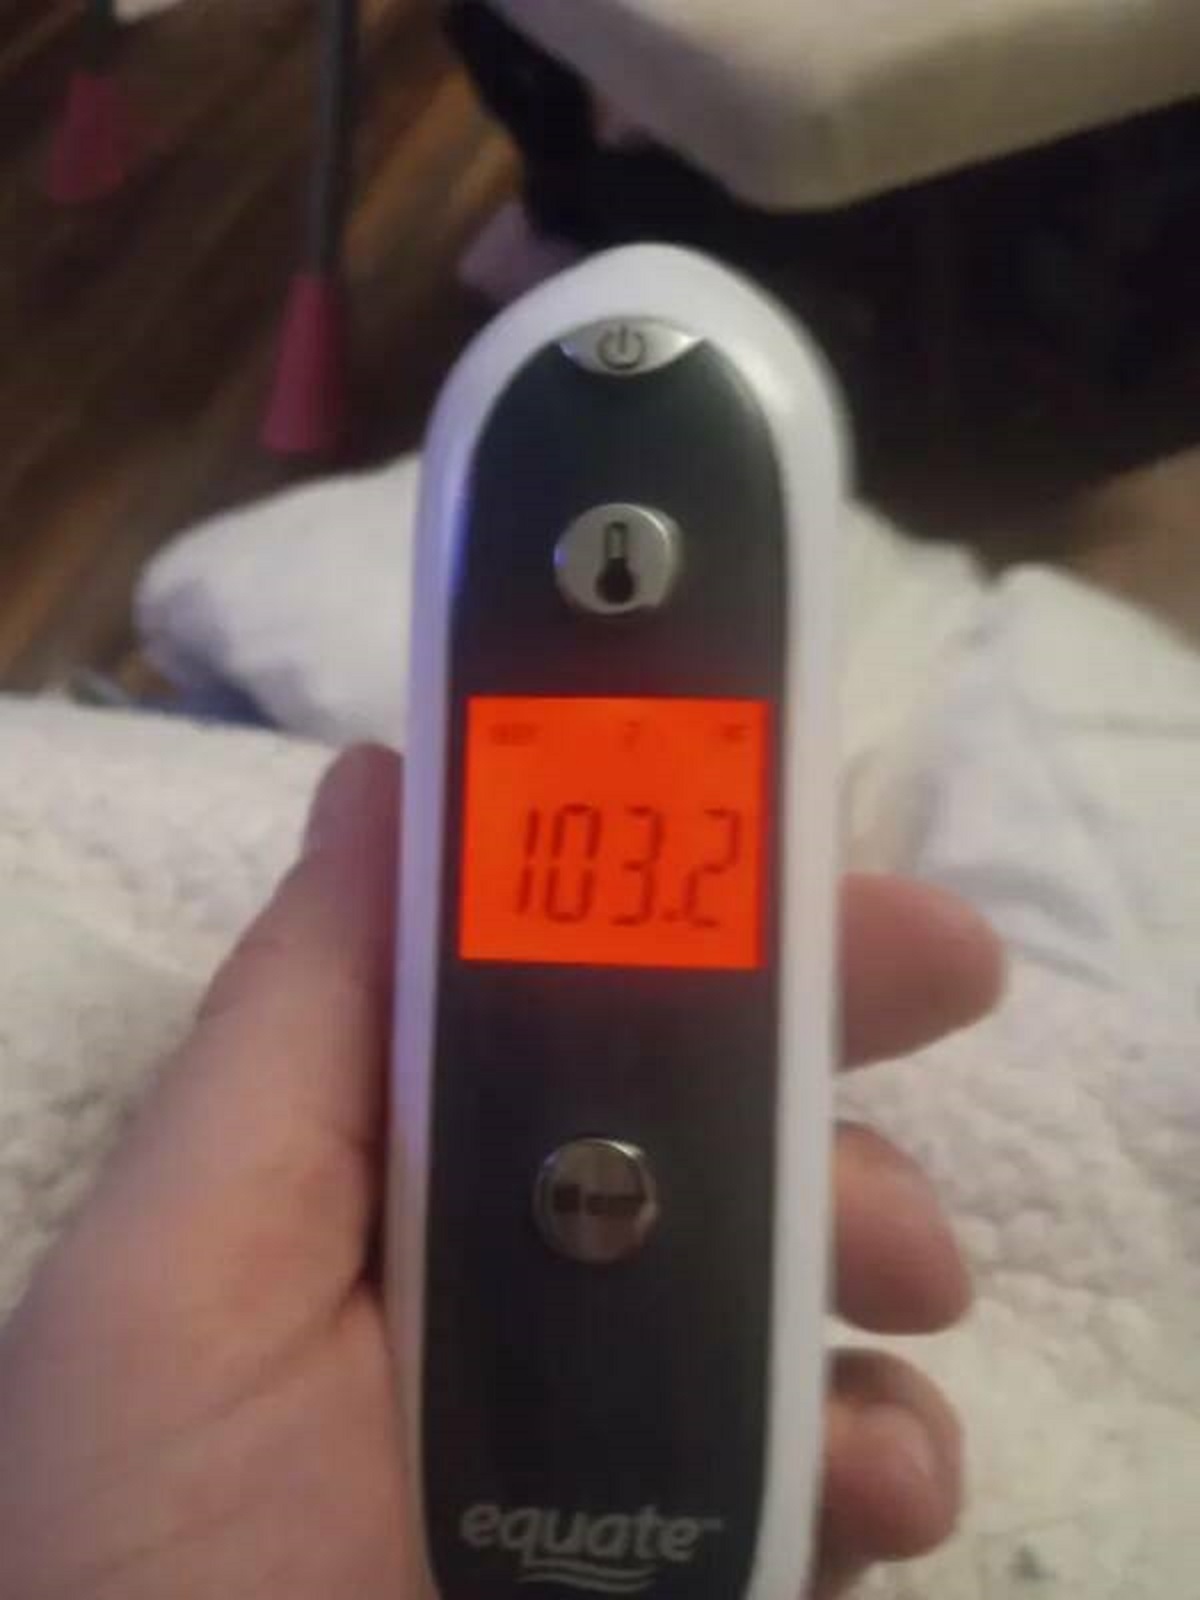 “My thermometer has been saying I don’t have a fever, but then I cleaned it and rechecked”